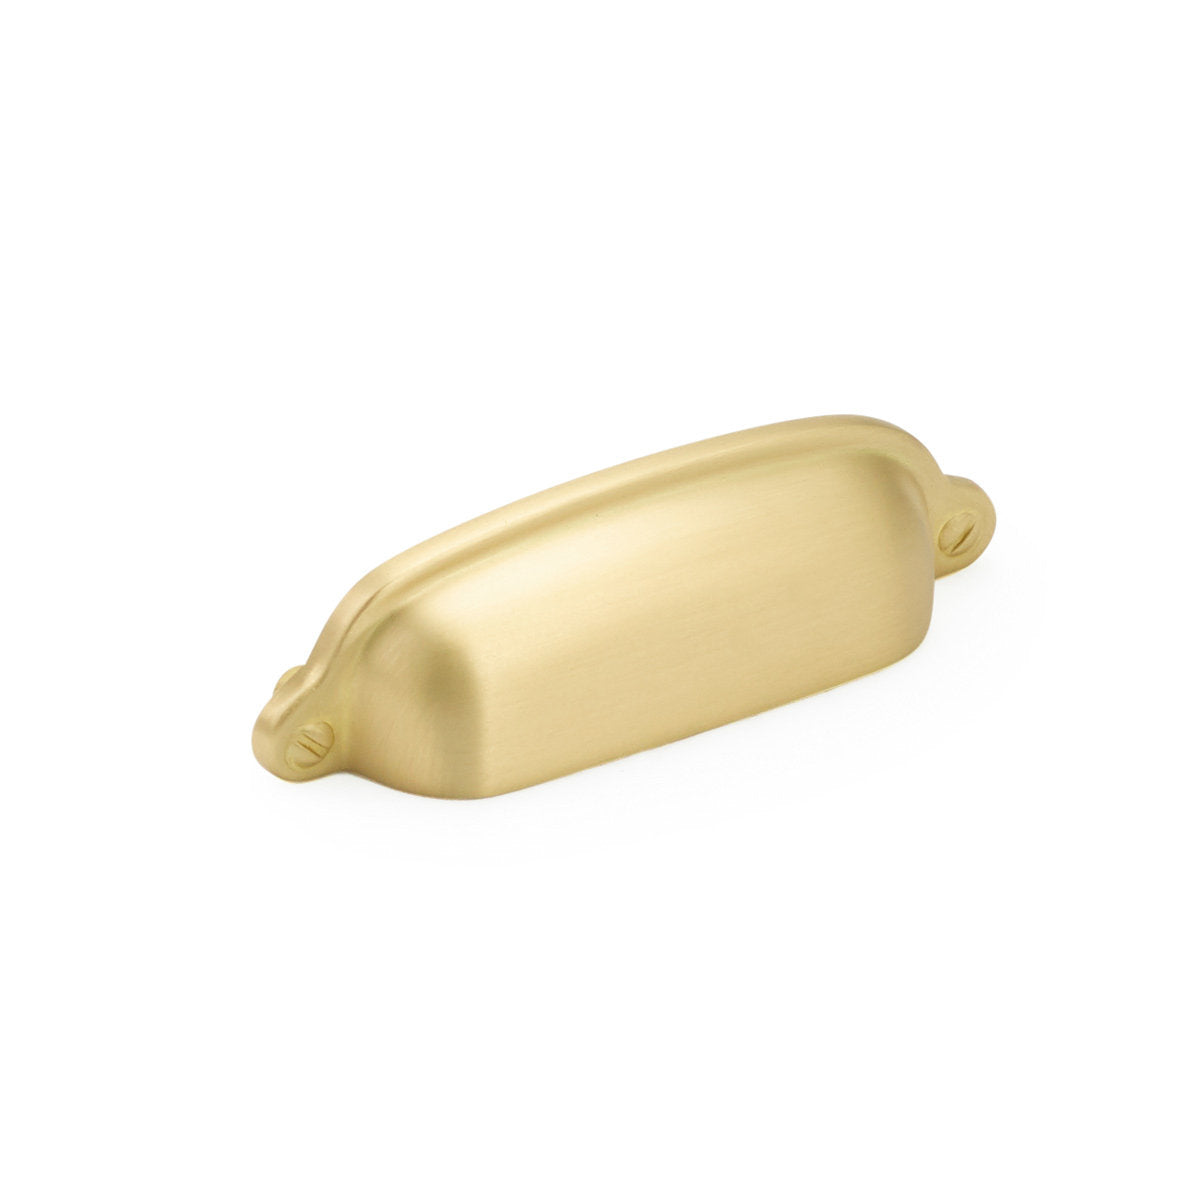 Satin Brass Drawer Pulls "Transitional" Handles and Cup Pulls - Brass Cabinet Hardware 